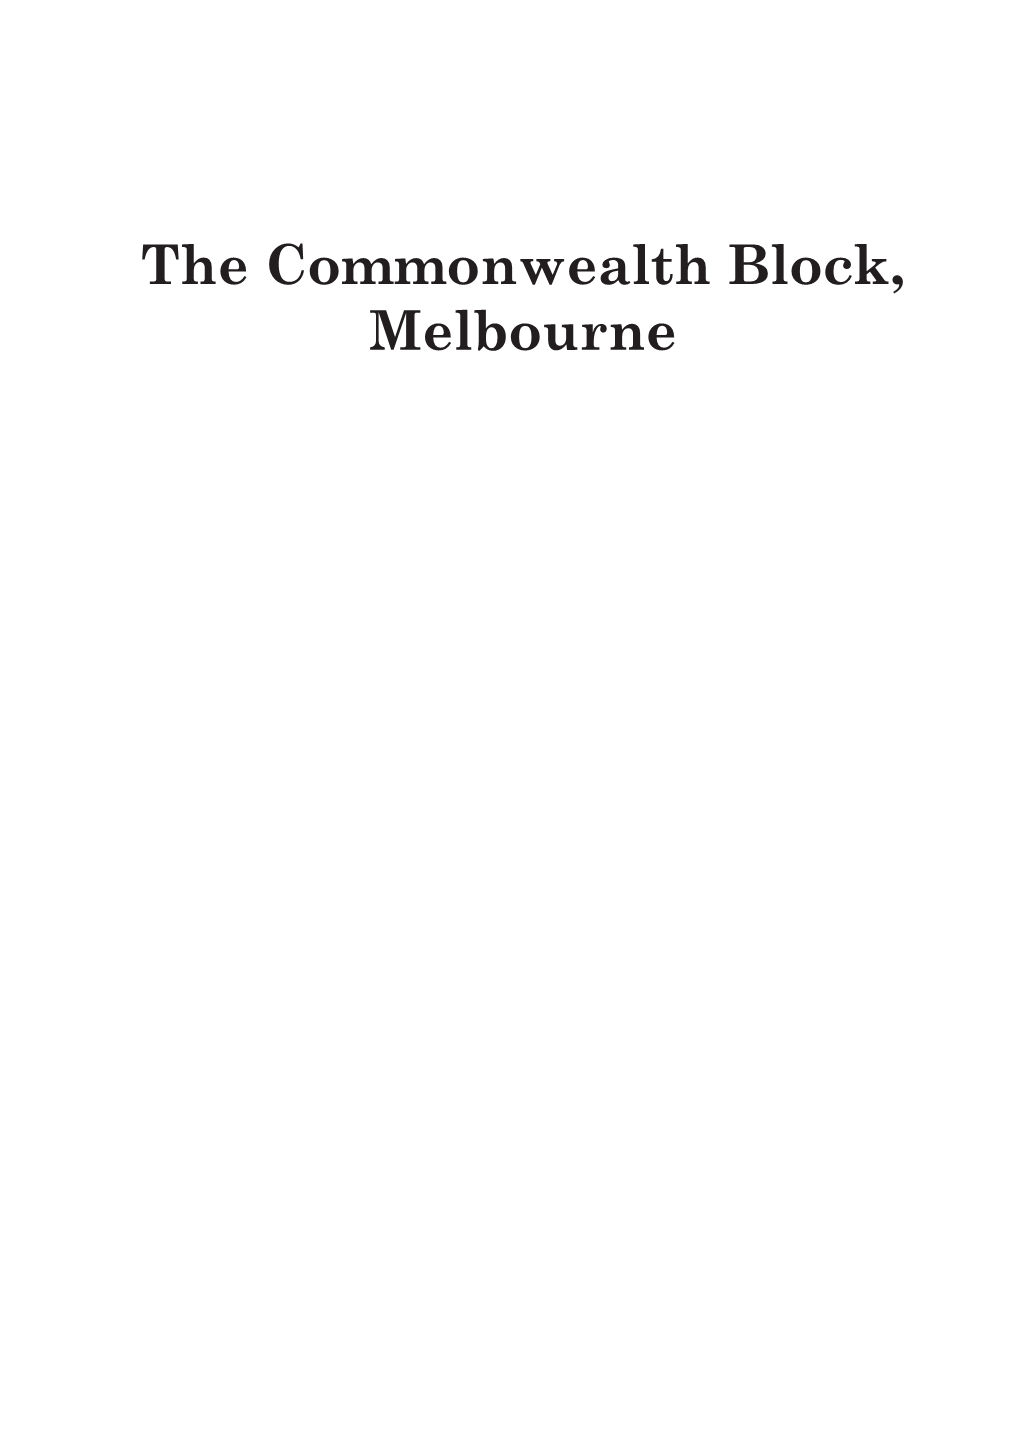 The Commonwealth Block, Melbourne Studies in Australasian Historical Archaeology